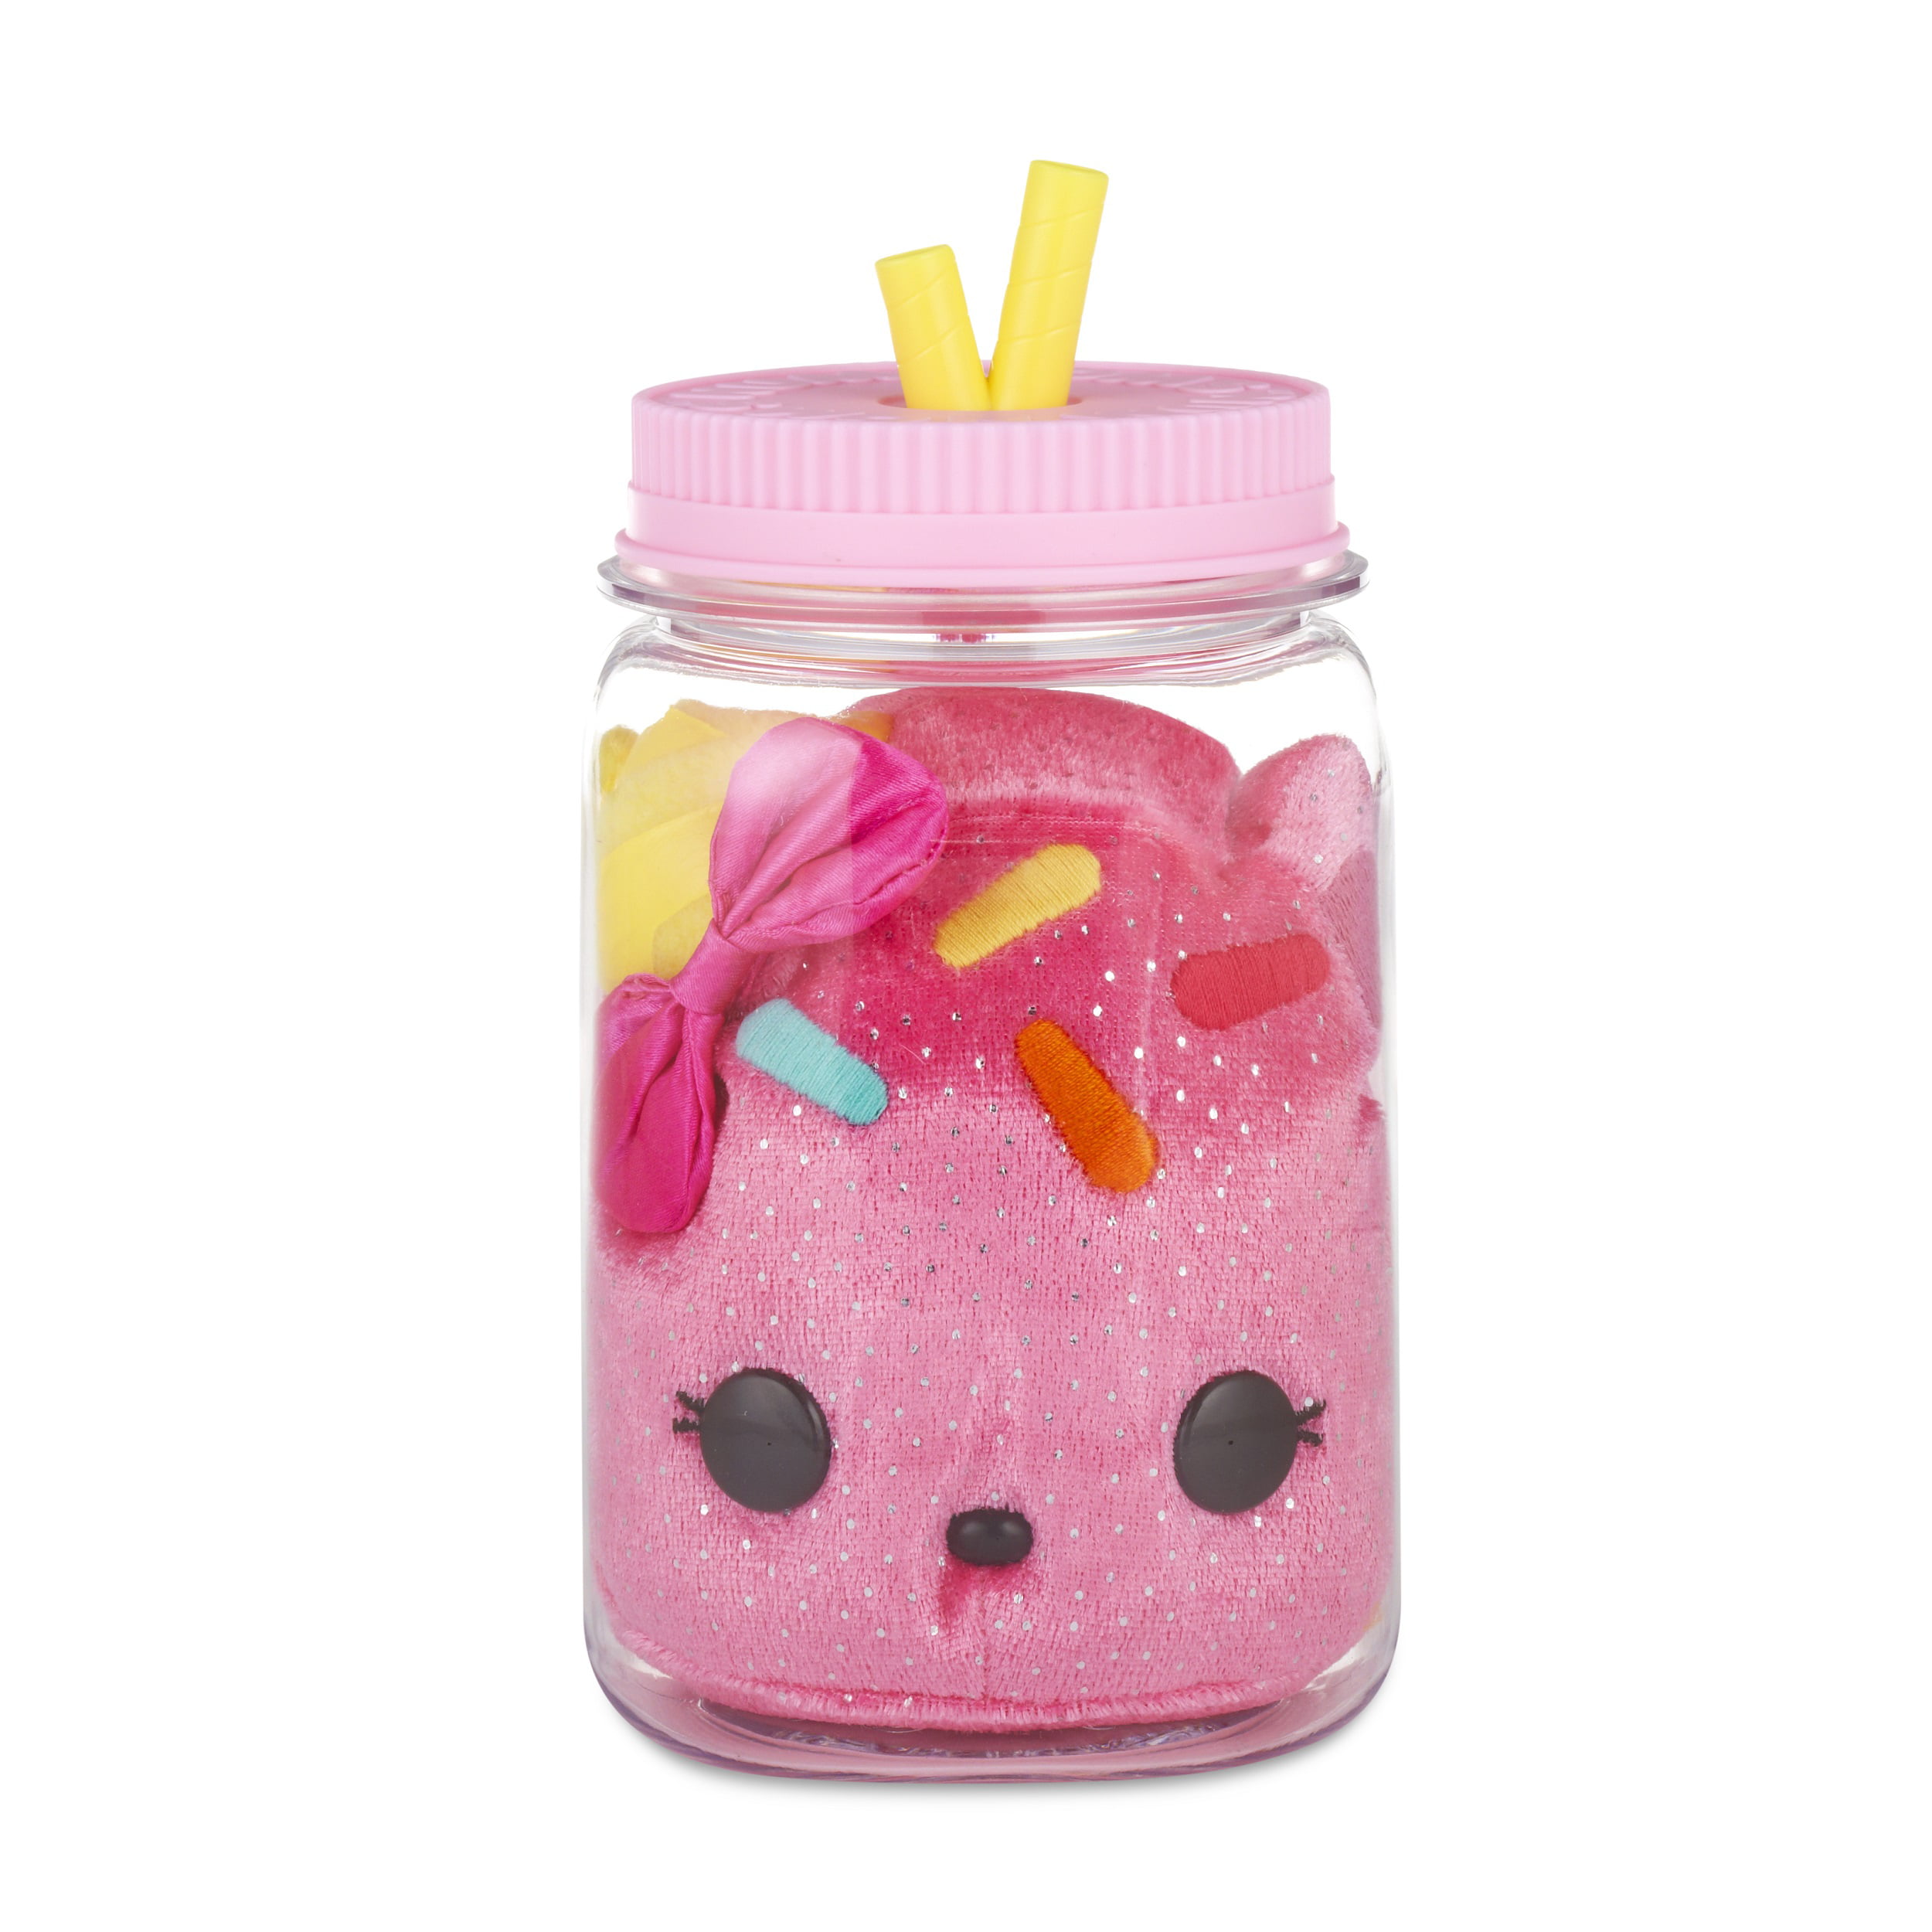 Cake Bear New Toys Toy Num Noms Surprise in a Jar 